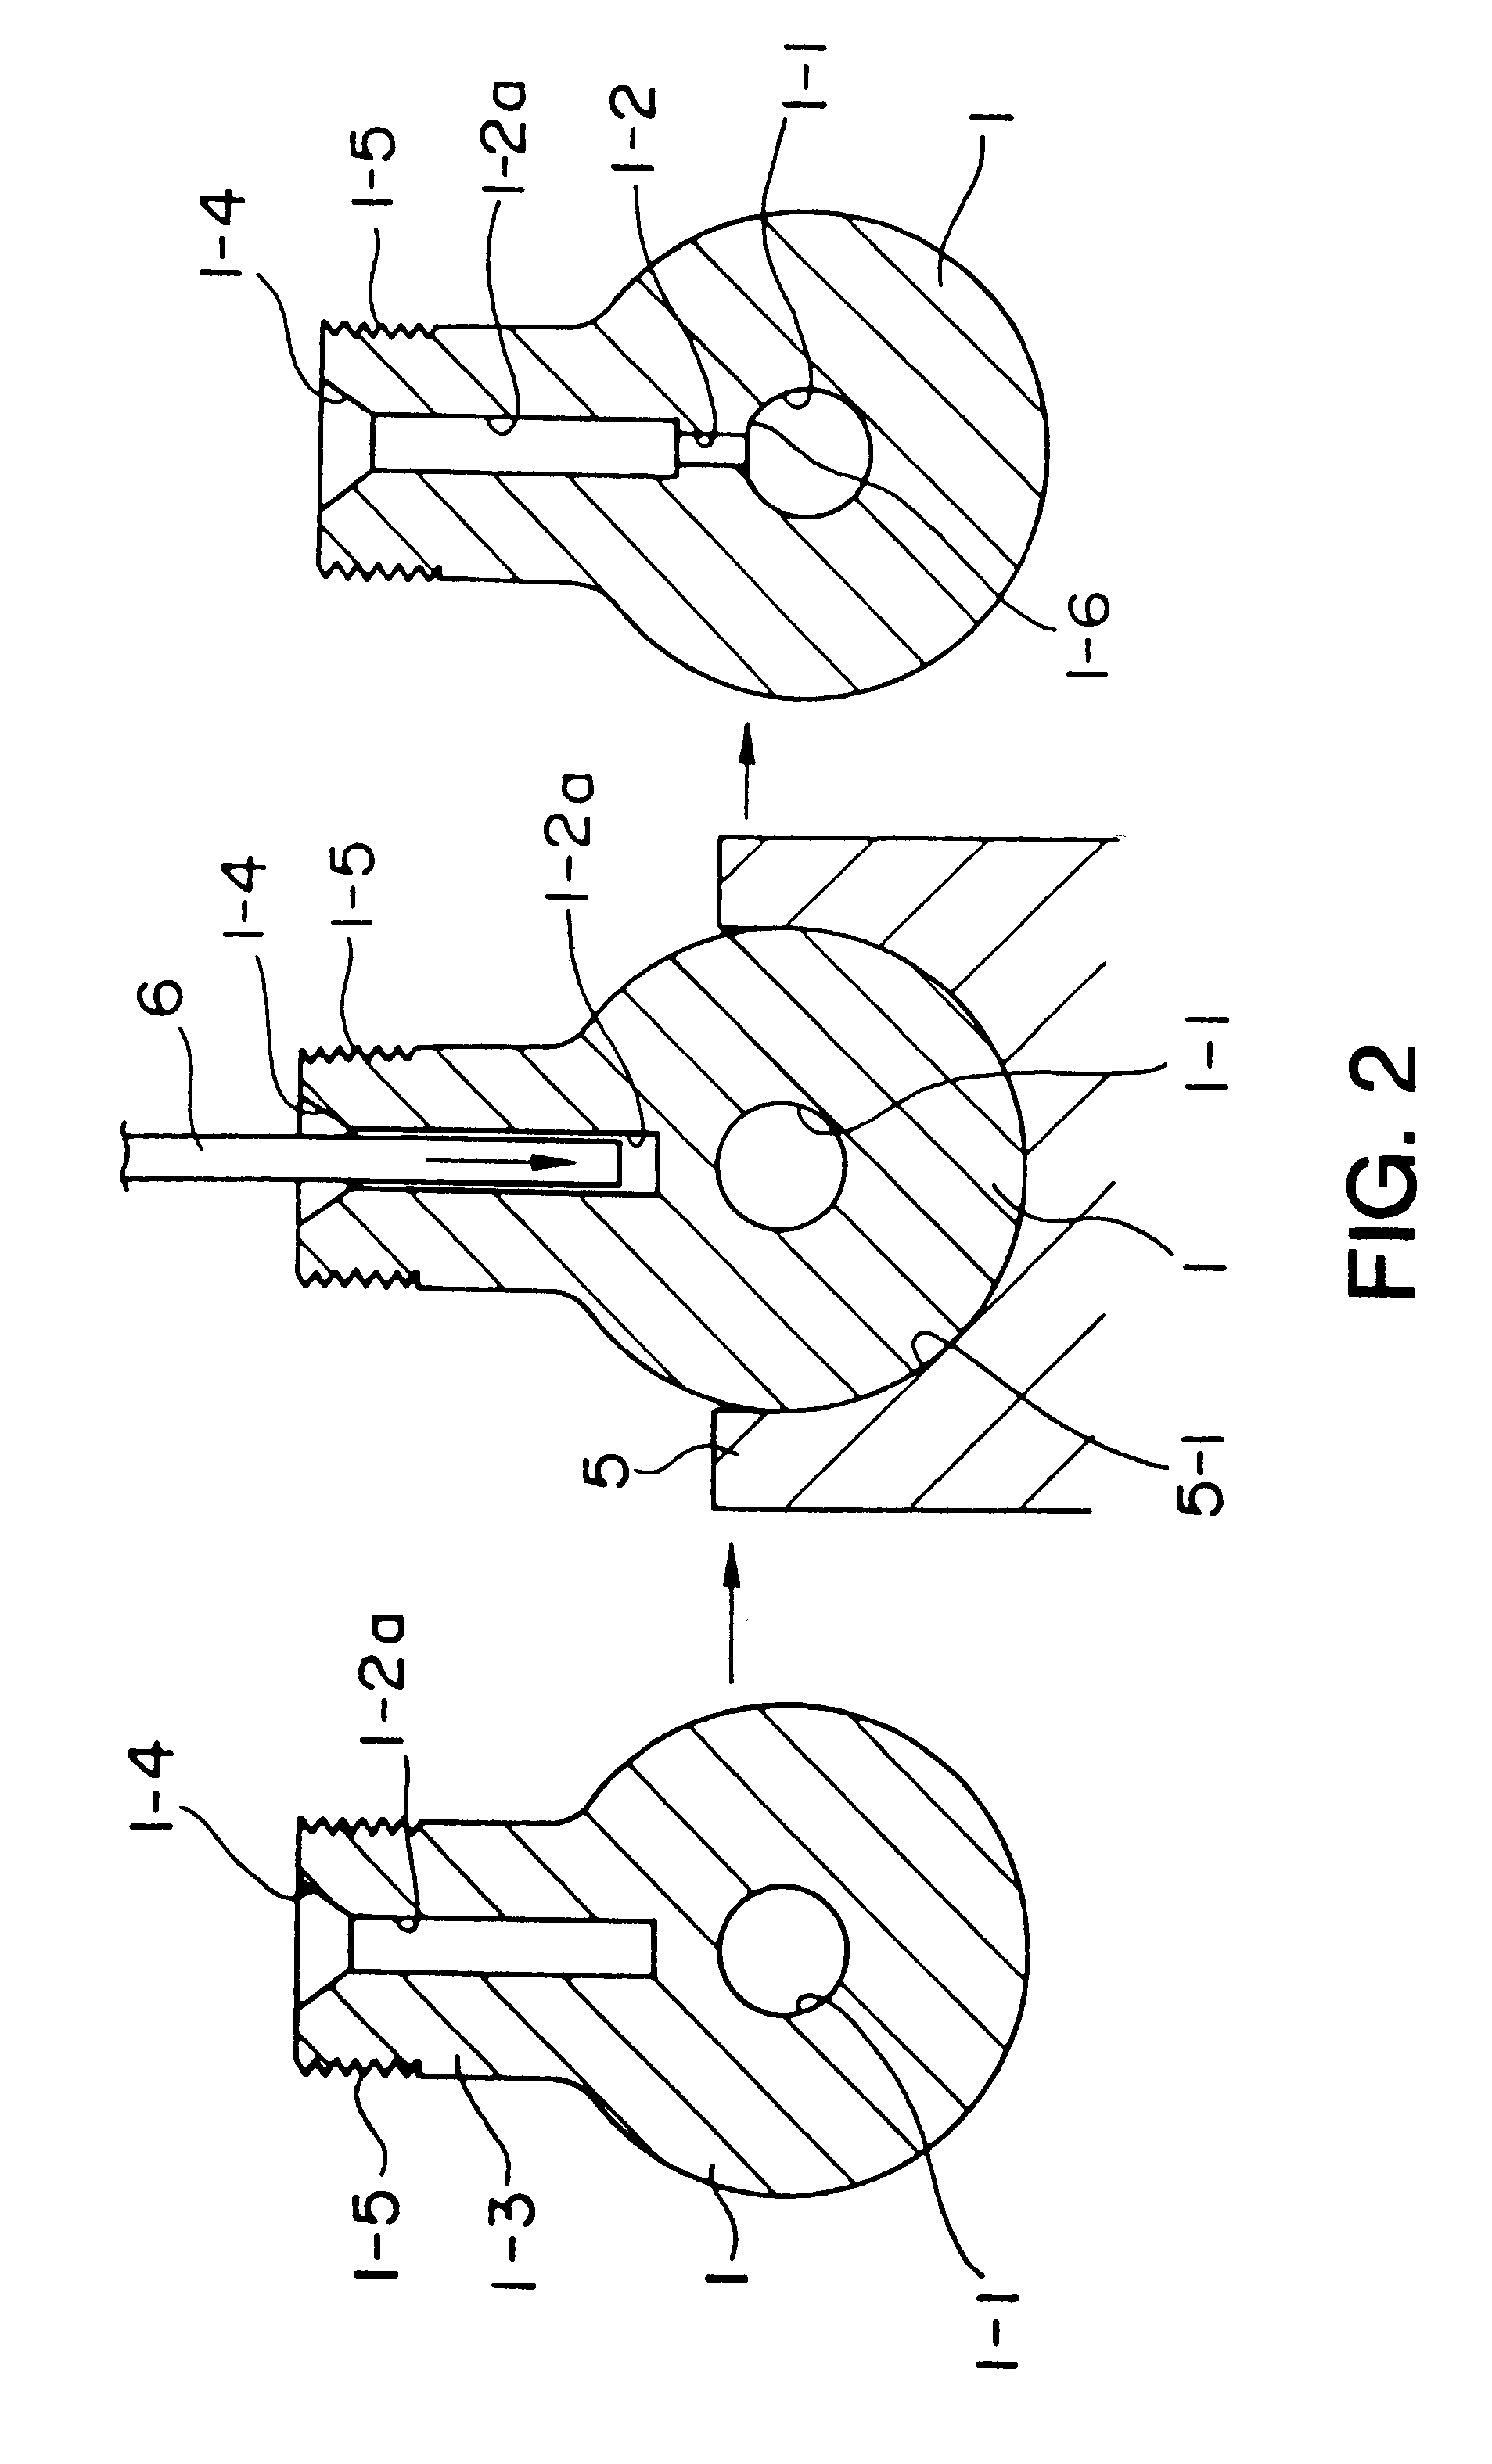 Common rail and method of manufacturing the same